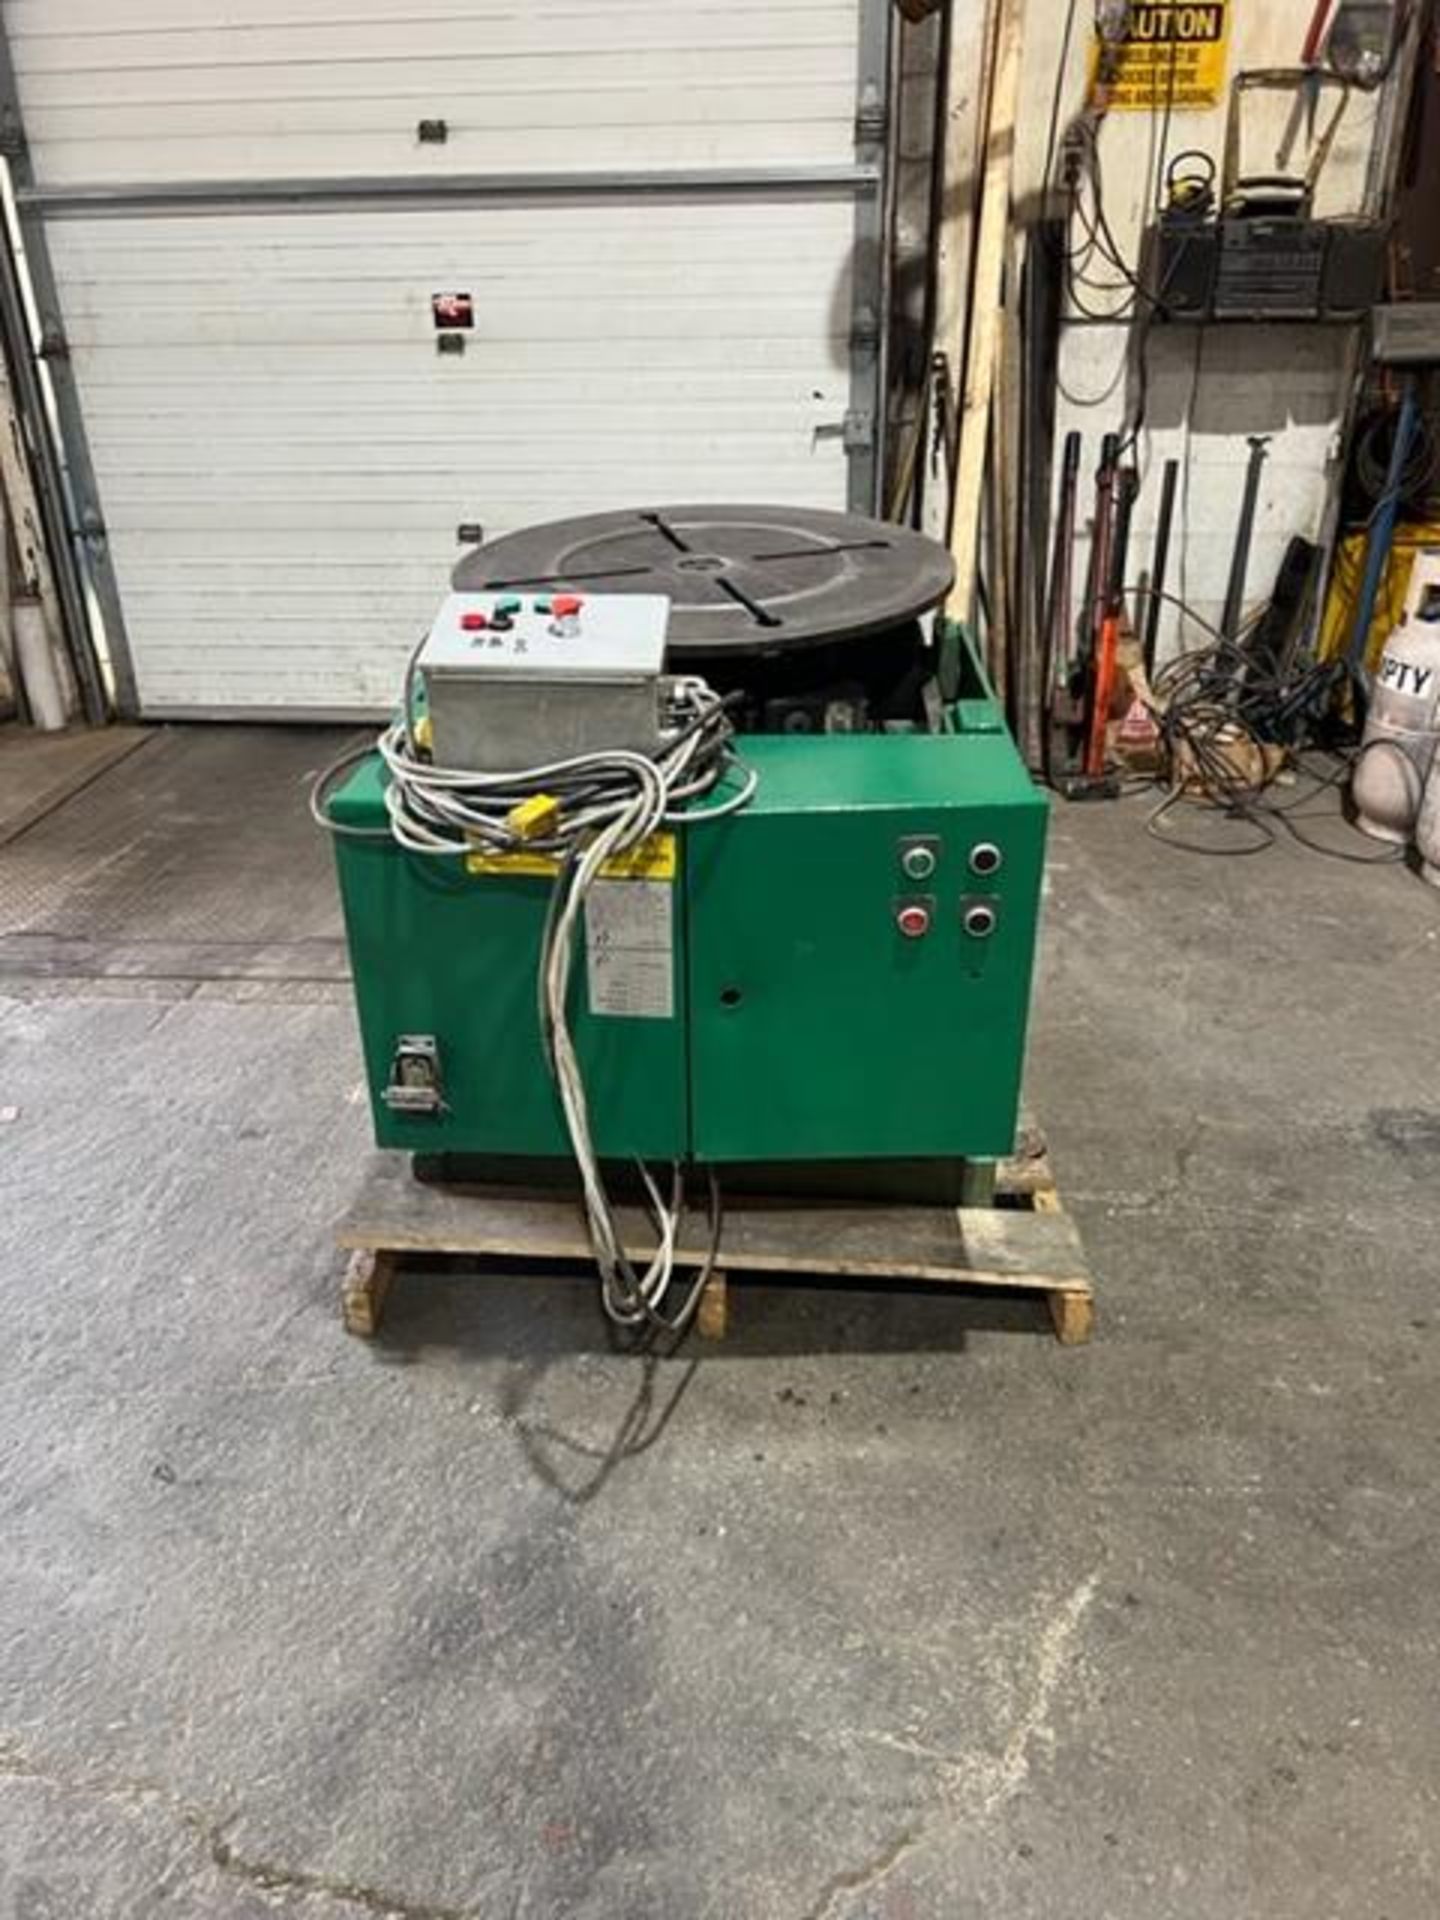 Irco 3,000lbs Capacity Welding Positioner TILT and ROTATE with controller panel CLEAN & MINT - Image 4 of 4